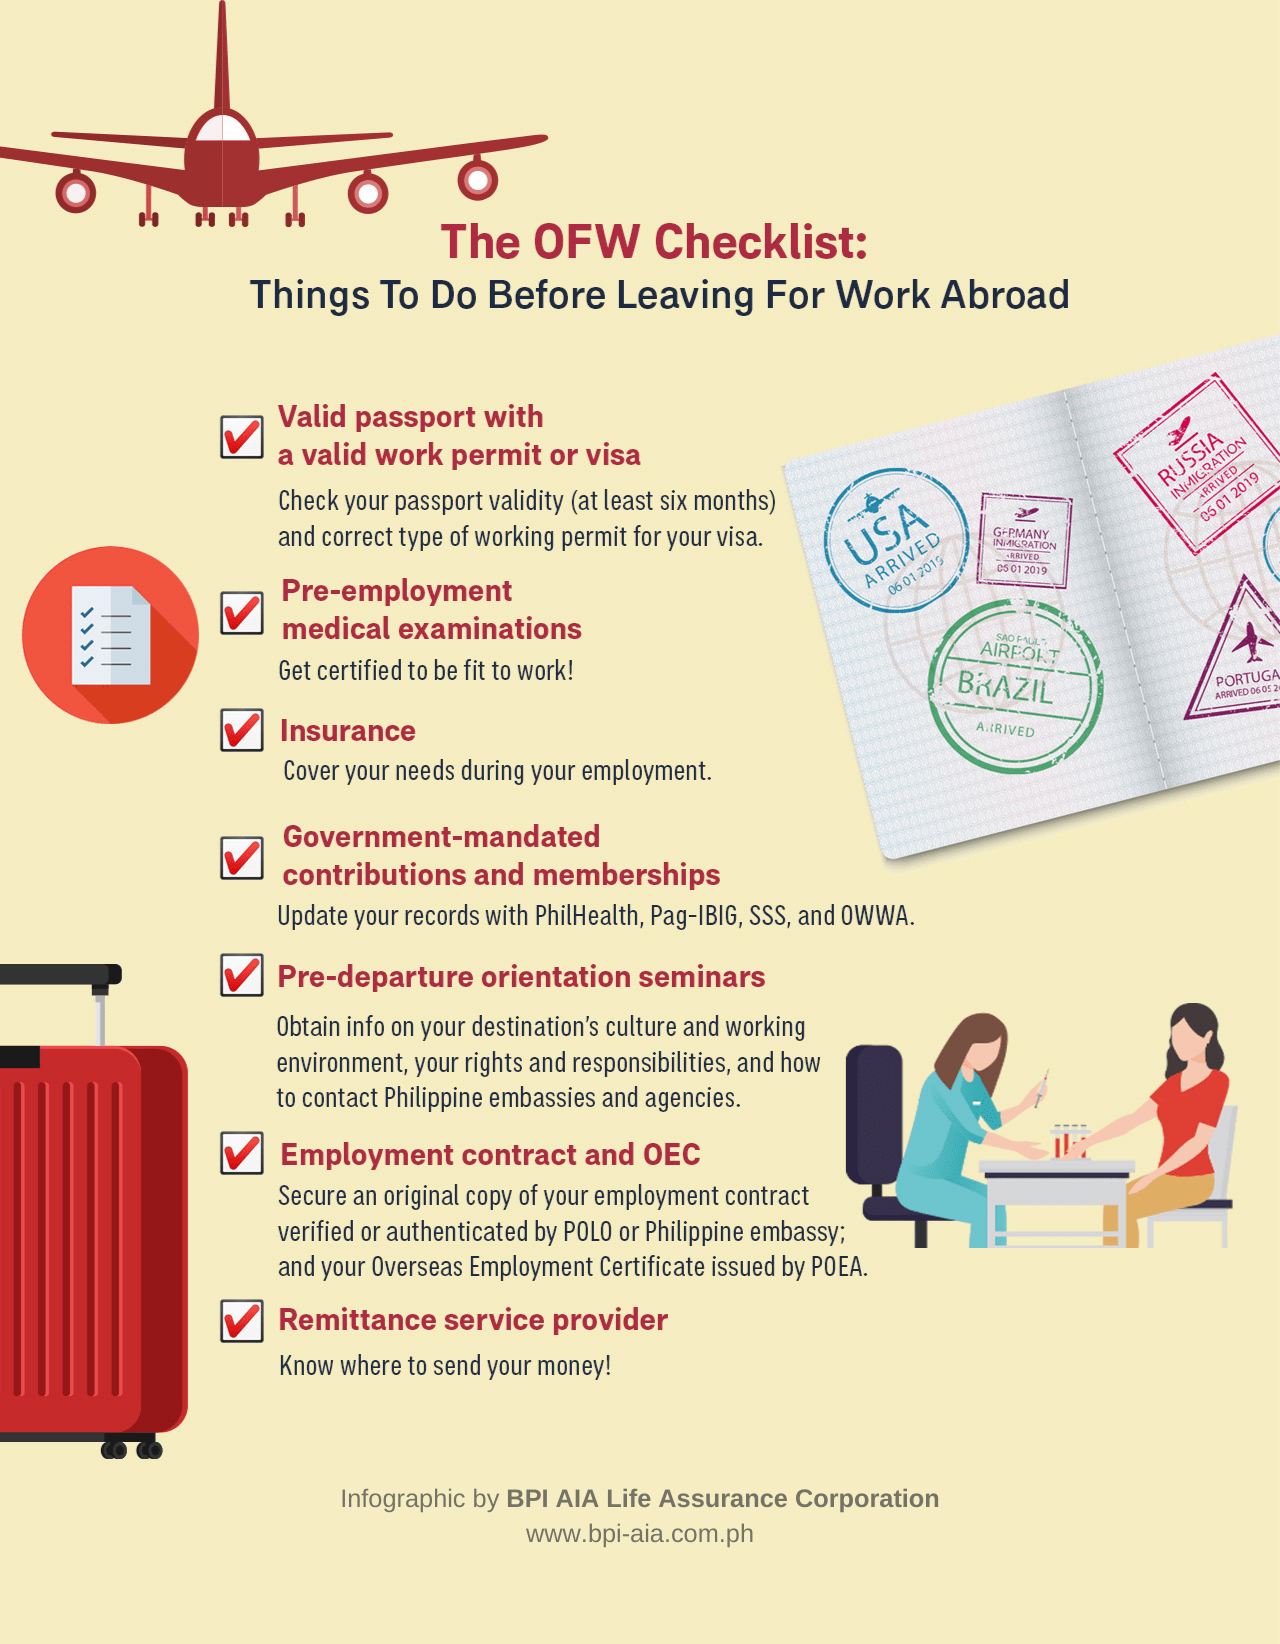 [Infographic] OFW’s Checklist Before Flying Abroad